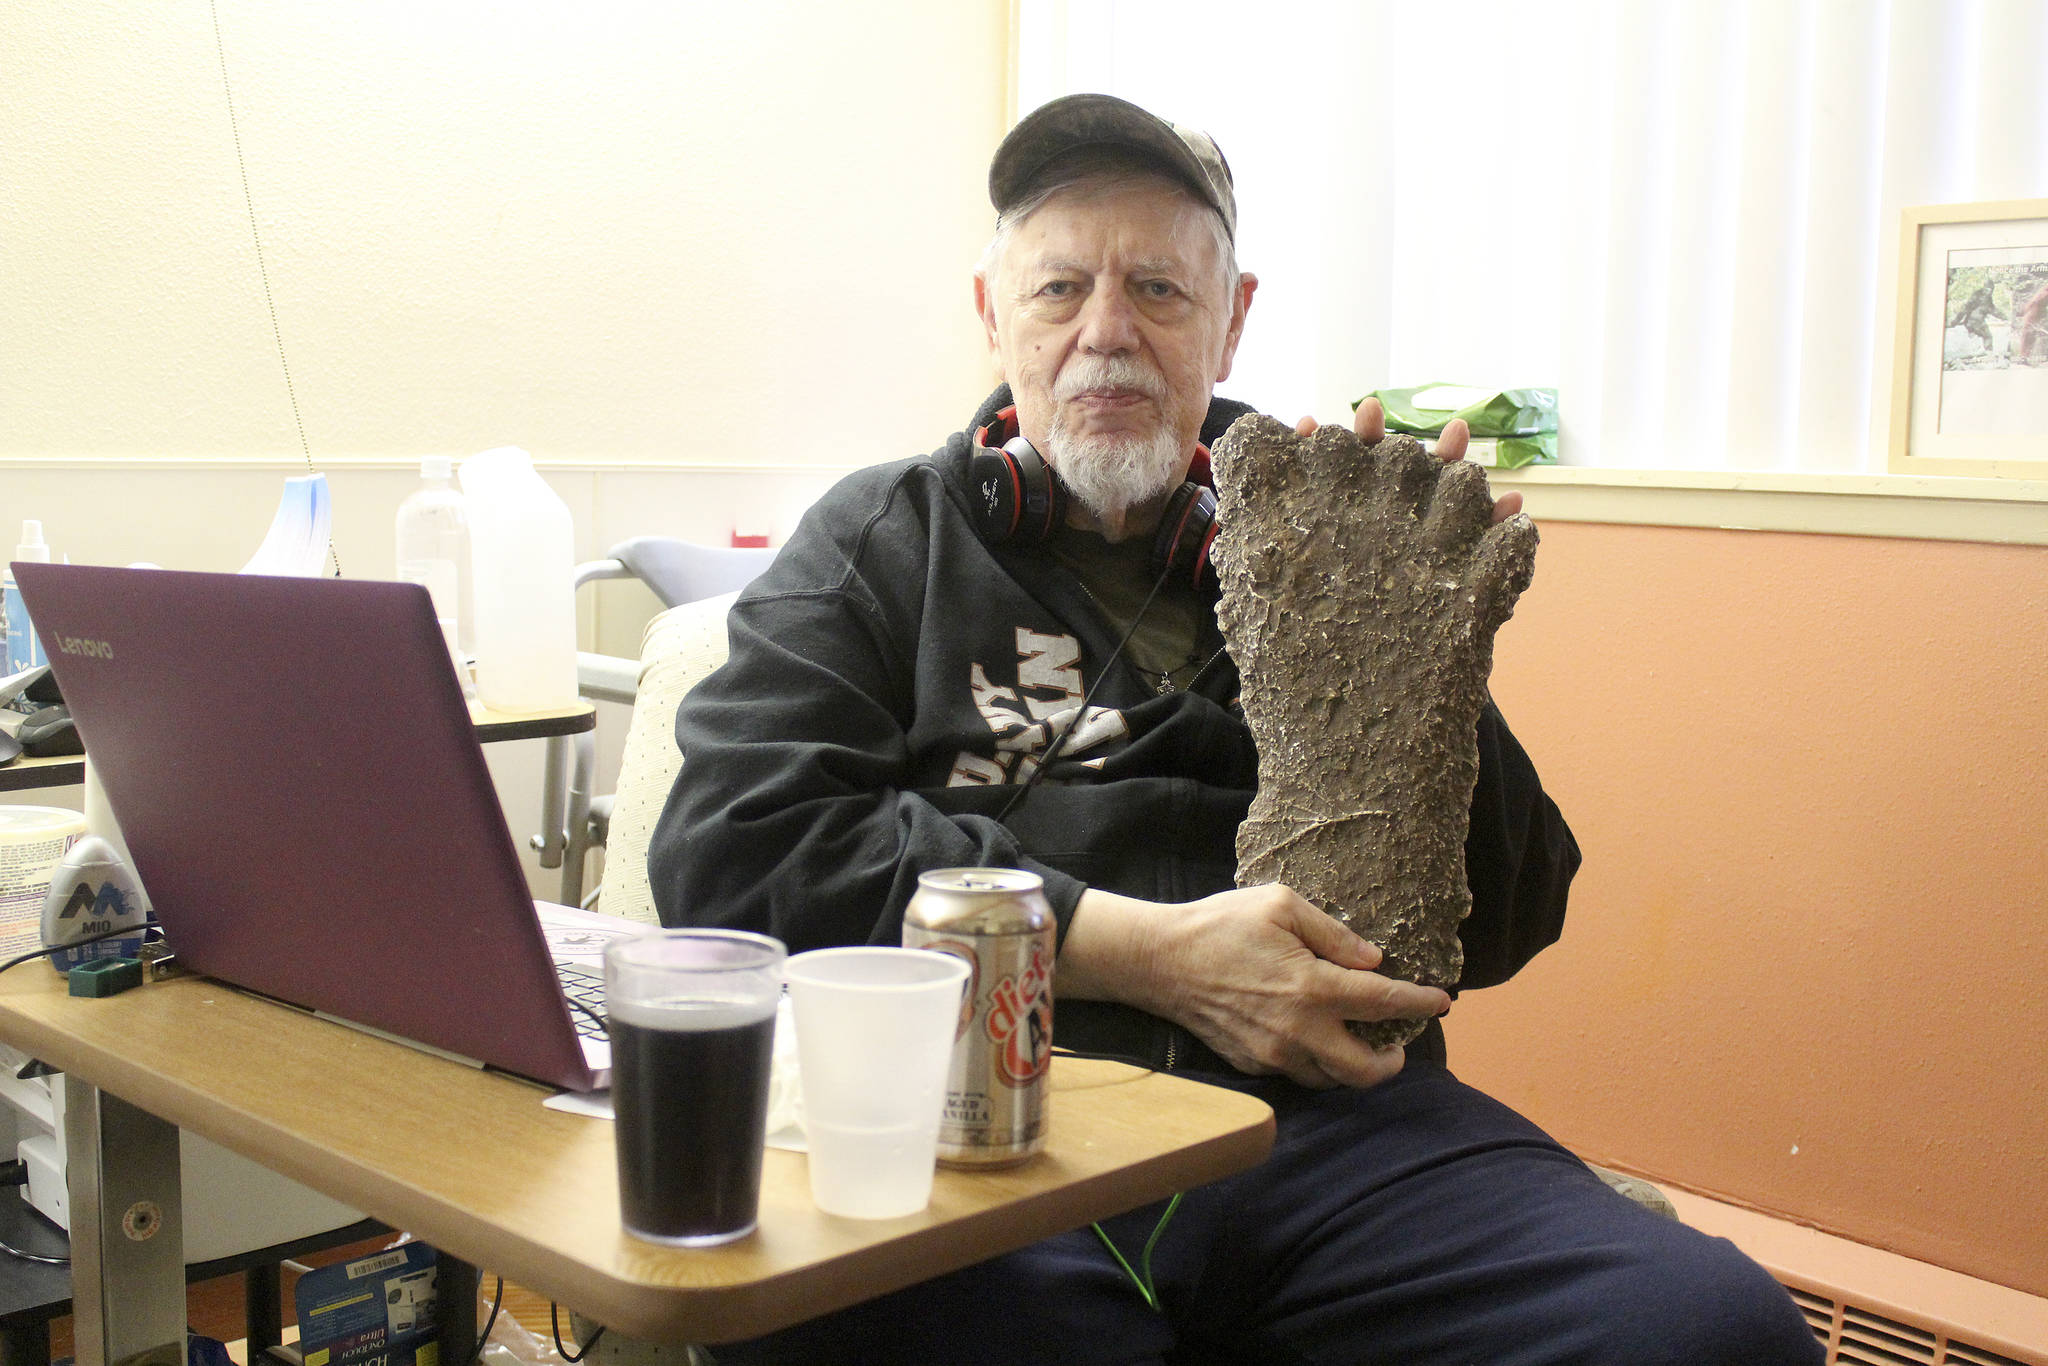 Thom Cantrell, one of the organizers of the upcoming International Conference for Primal People, holds up a mould of a Sasquatch footprint. He said the mould was taken in the Blue Mountains in Oregon by Paul Freeman, a well-known Sasquatch hunter who’s 1994 footage of a Sasquatch in that area made big waves in the believer and skeptic communities alike. Photo by Ray Miller-Still